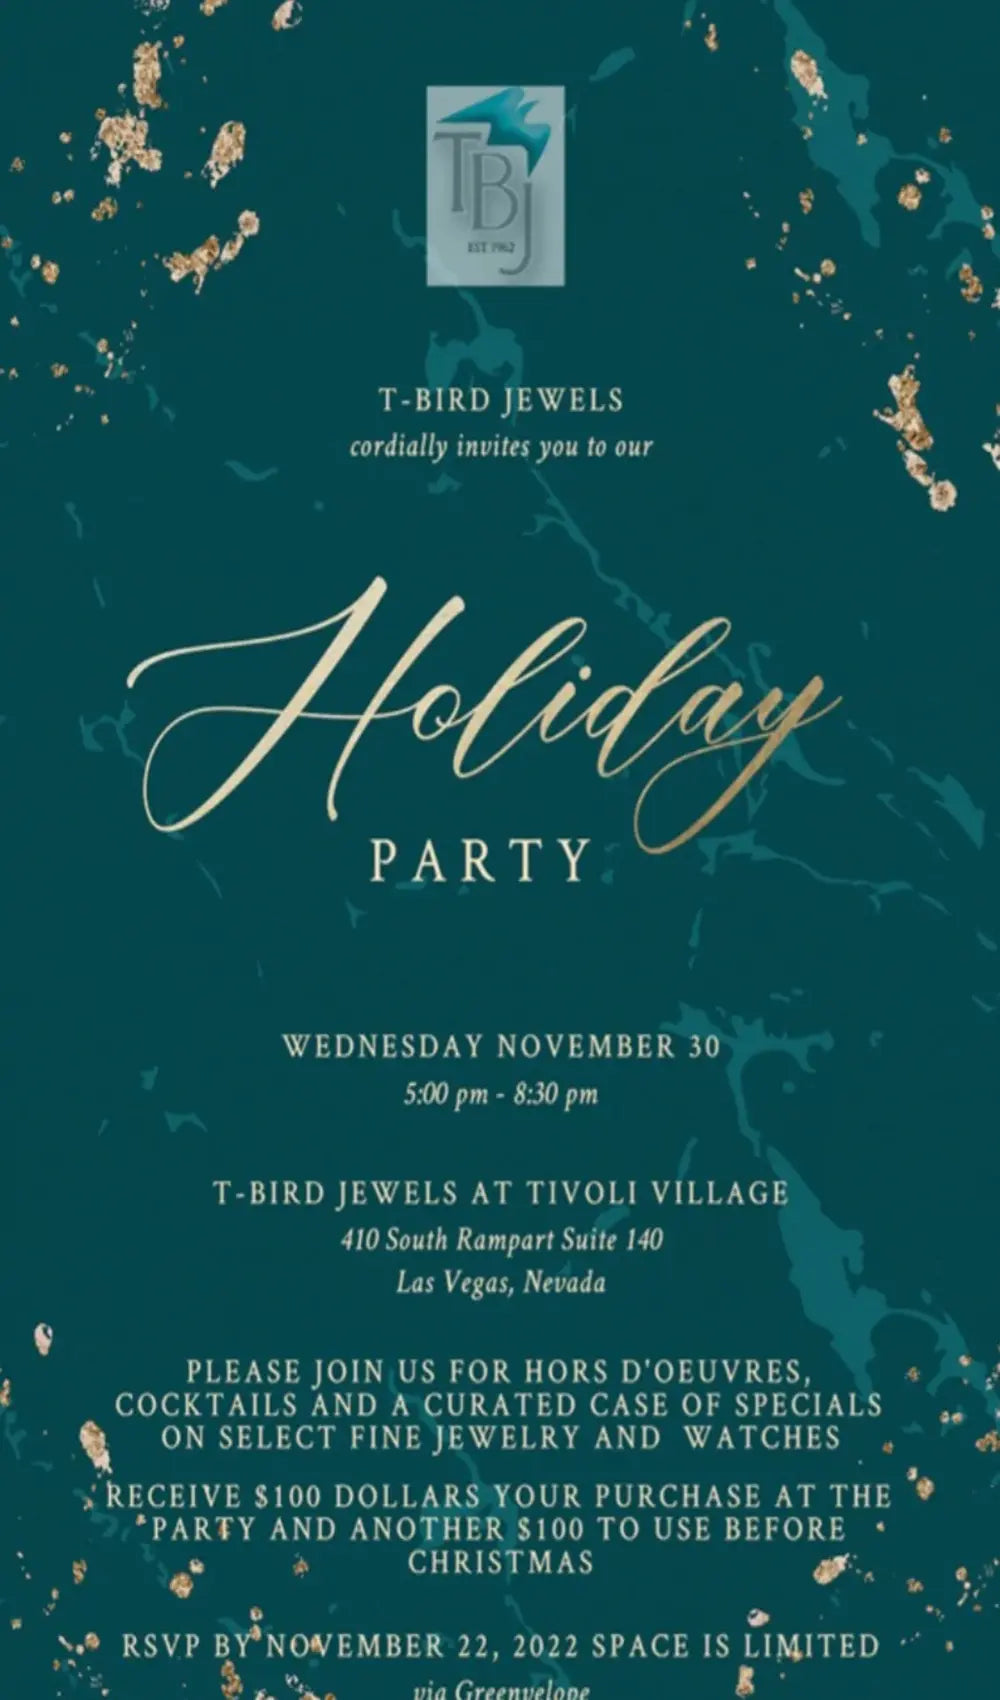 GET IN THE SEASONAL SPIRIT BY ATTENDING T-BIRD JEWELS ANNUAL HOLIDAY PARTY